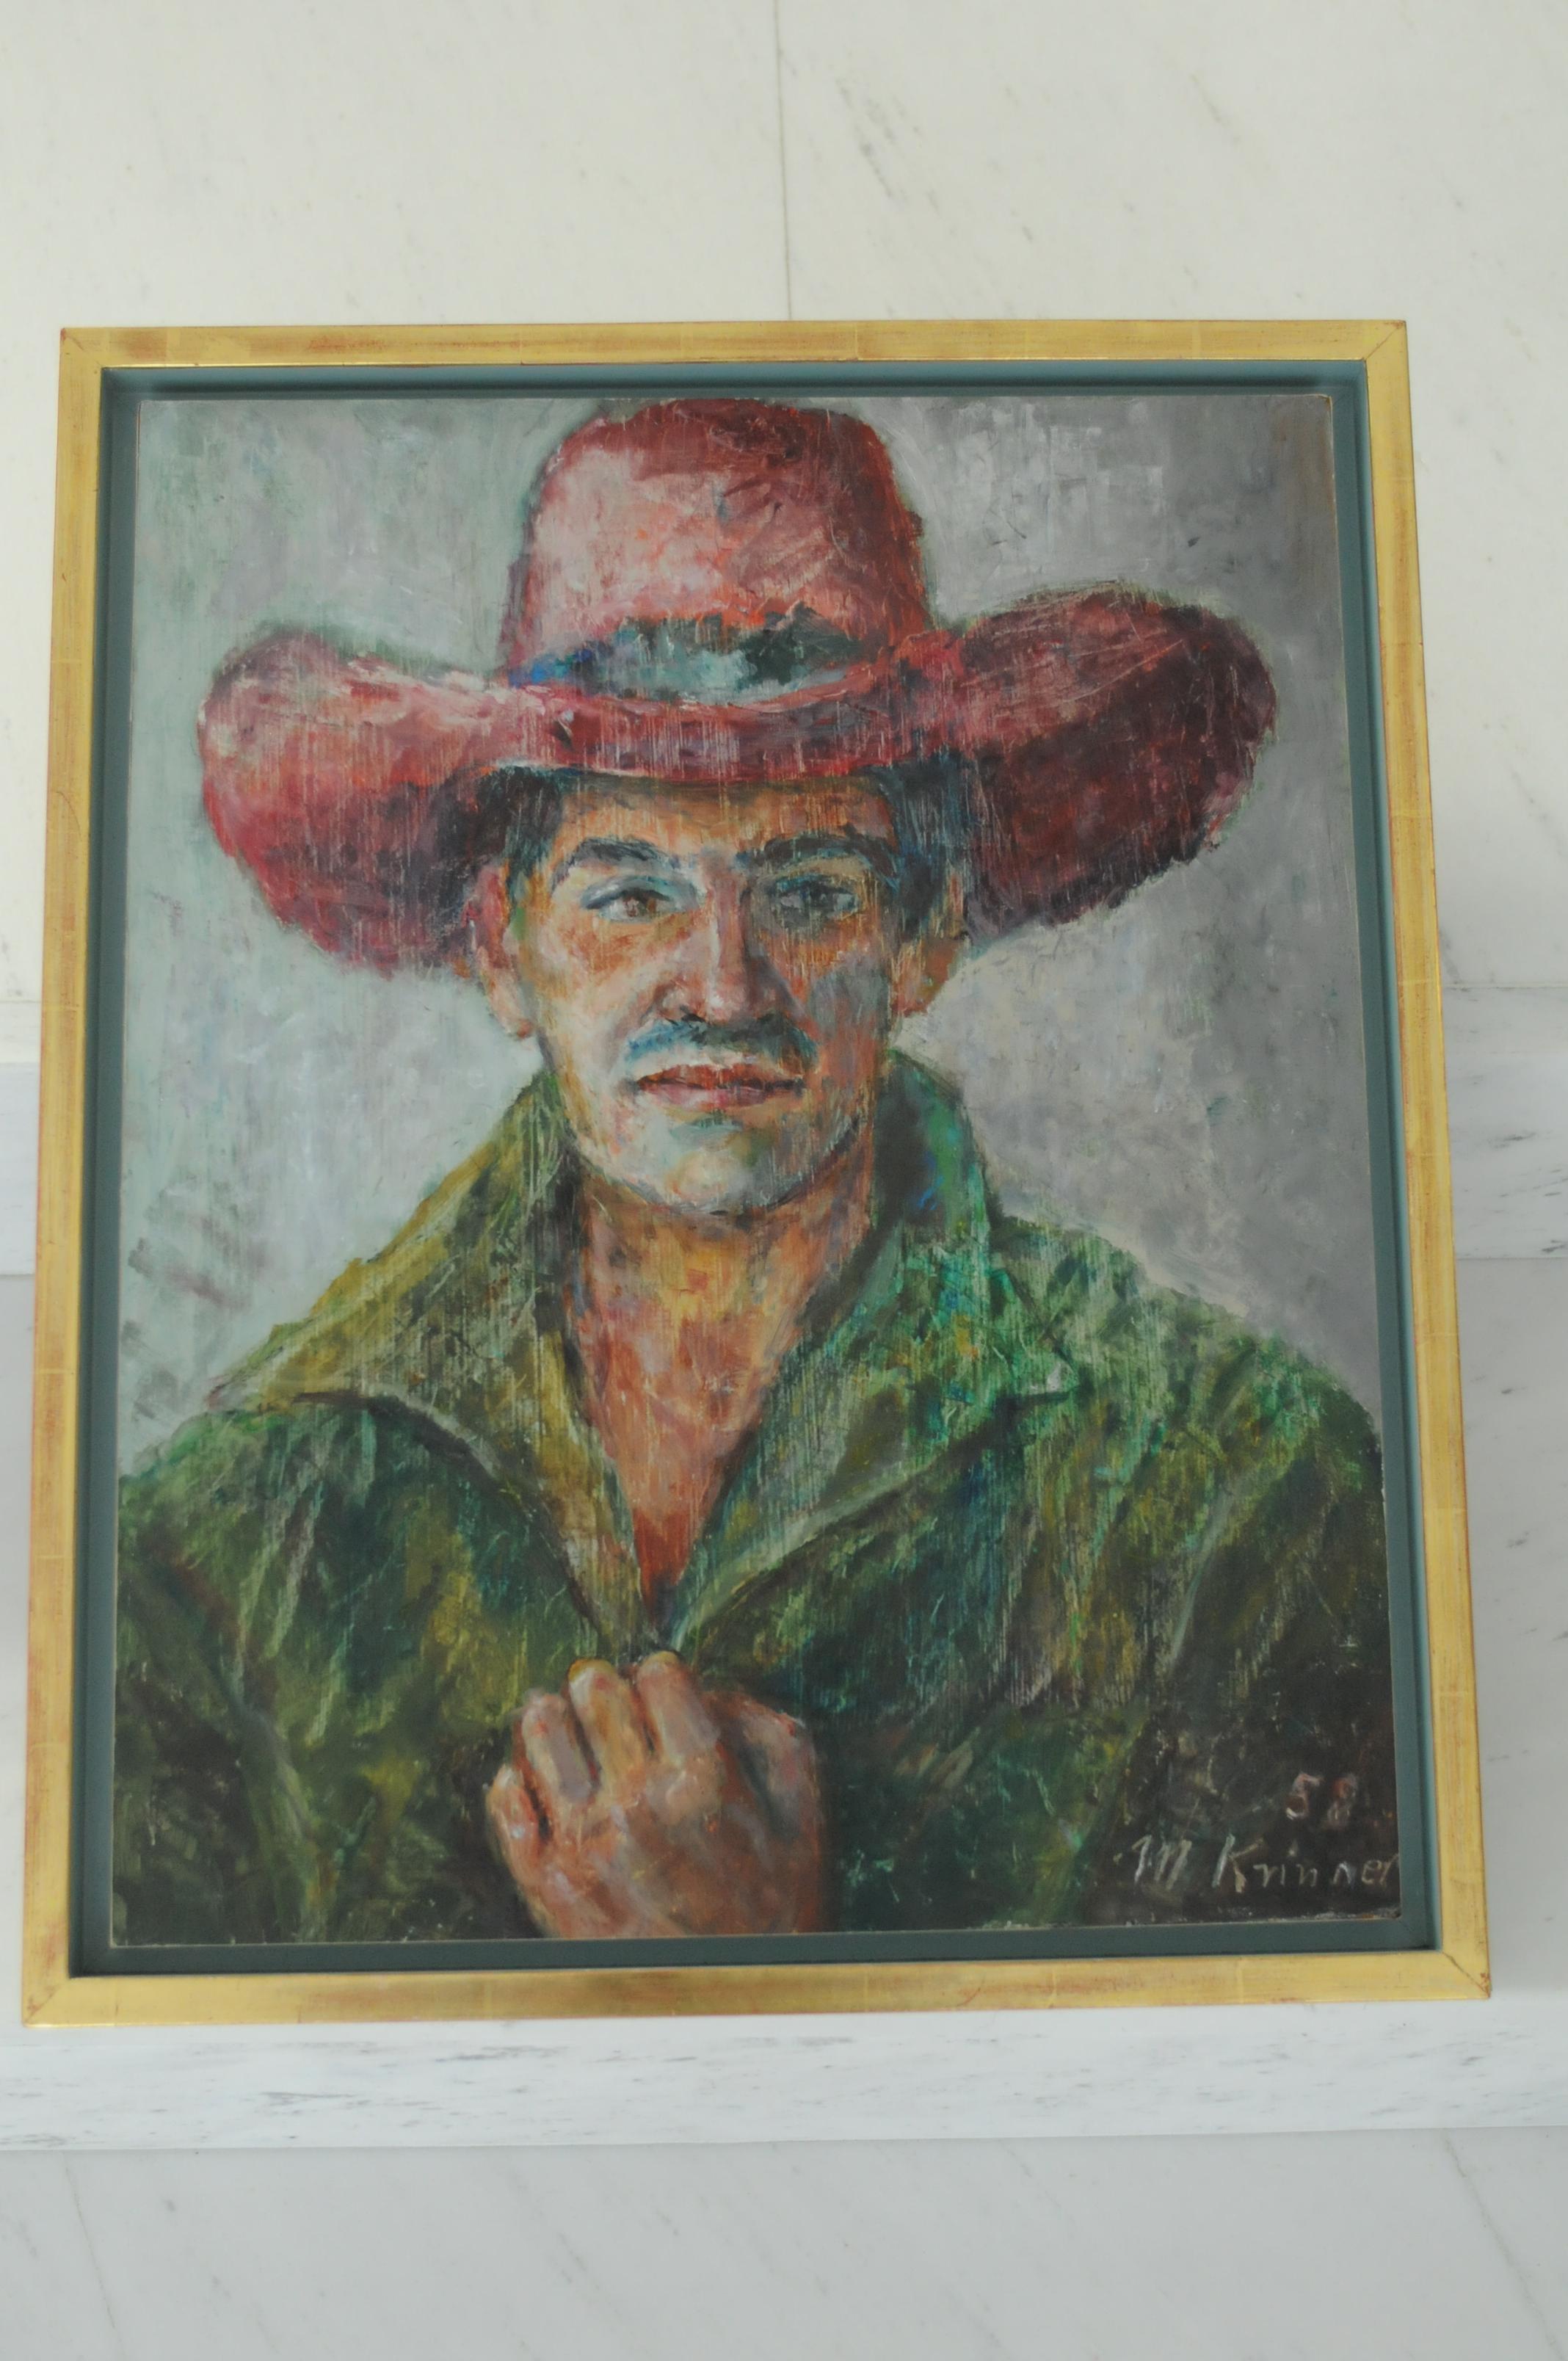 Spanish Man with hat - Gray Portrait Painting by Michaela Krinner